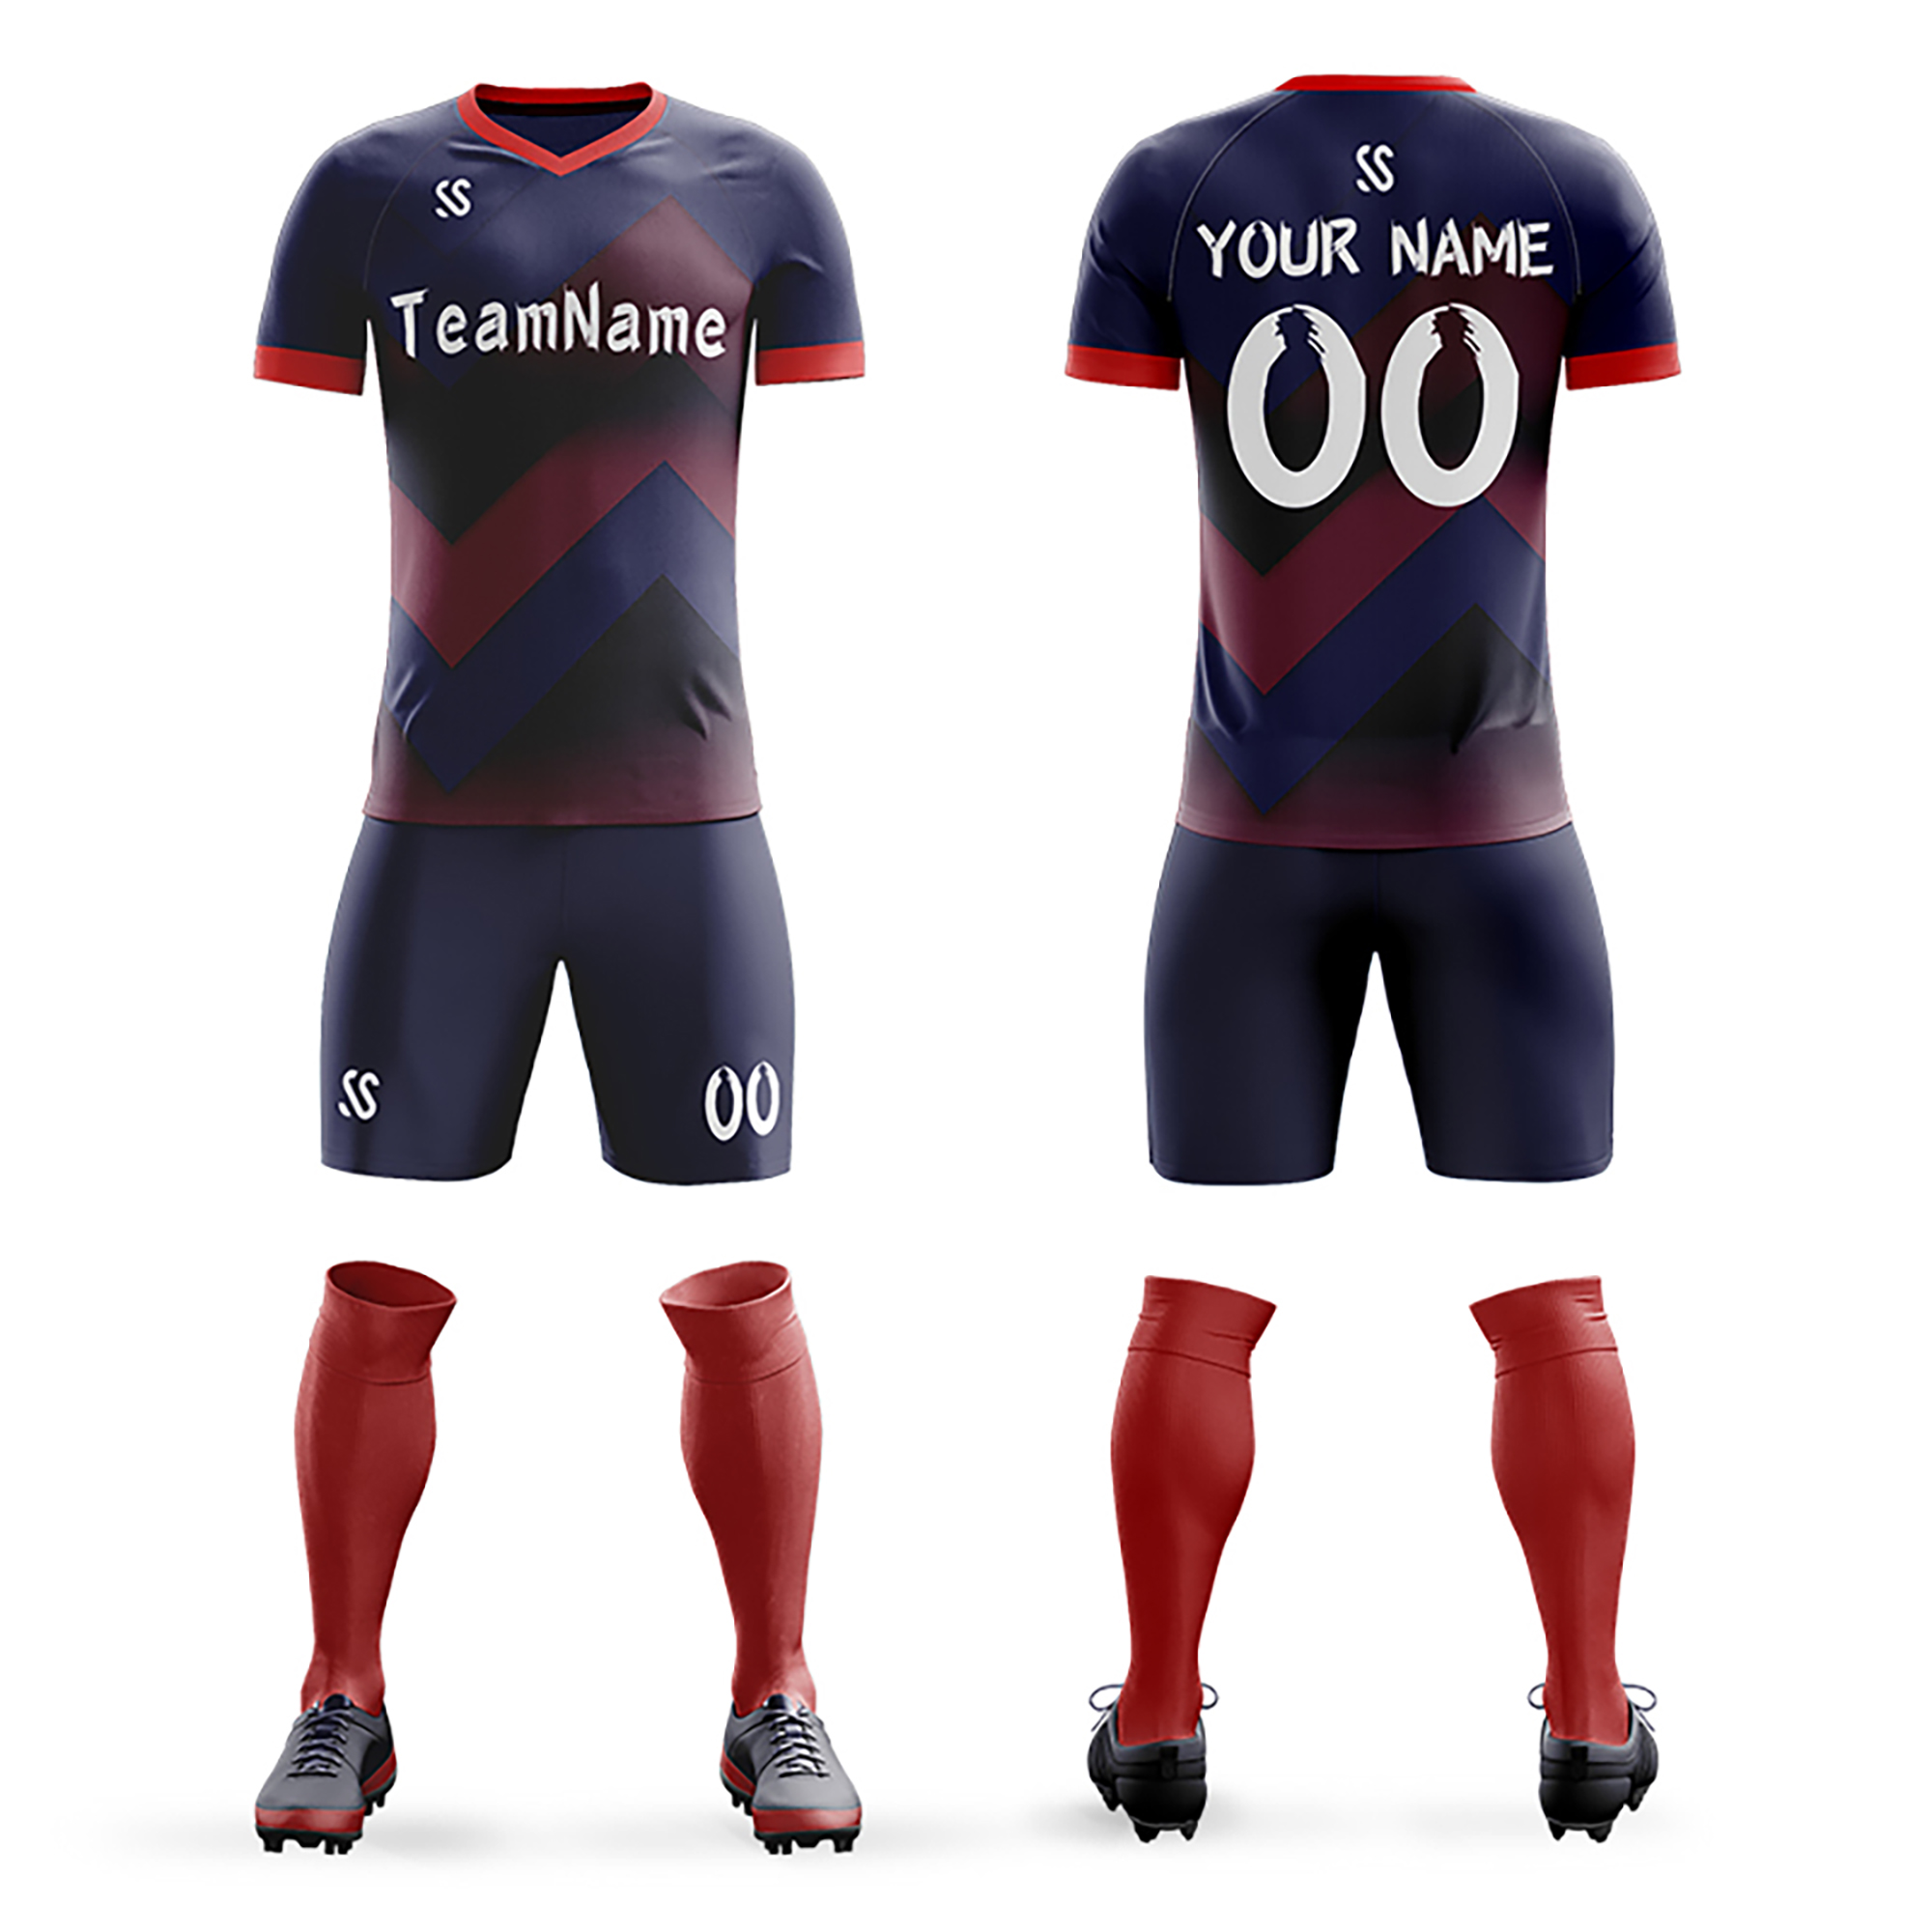 Custom Kits for Football: Choose the Right Kit for Your Team